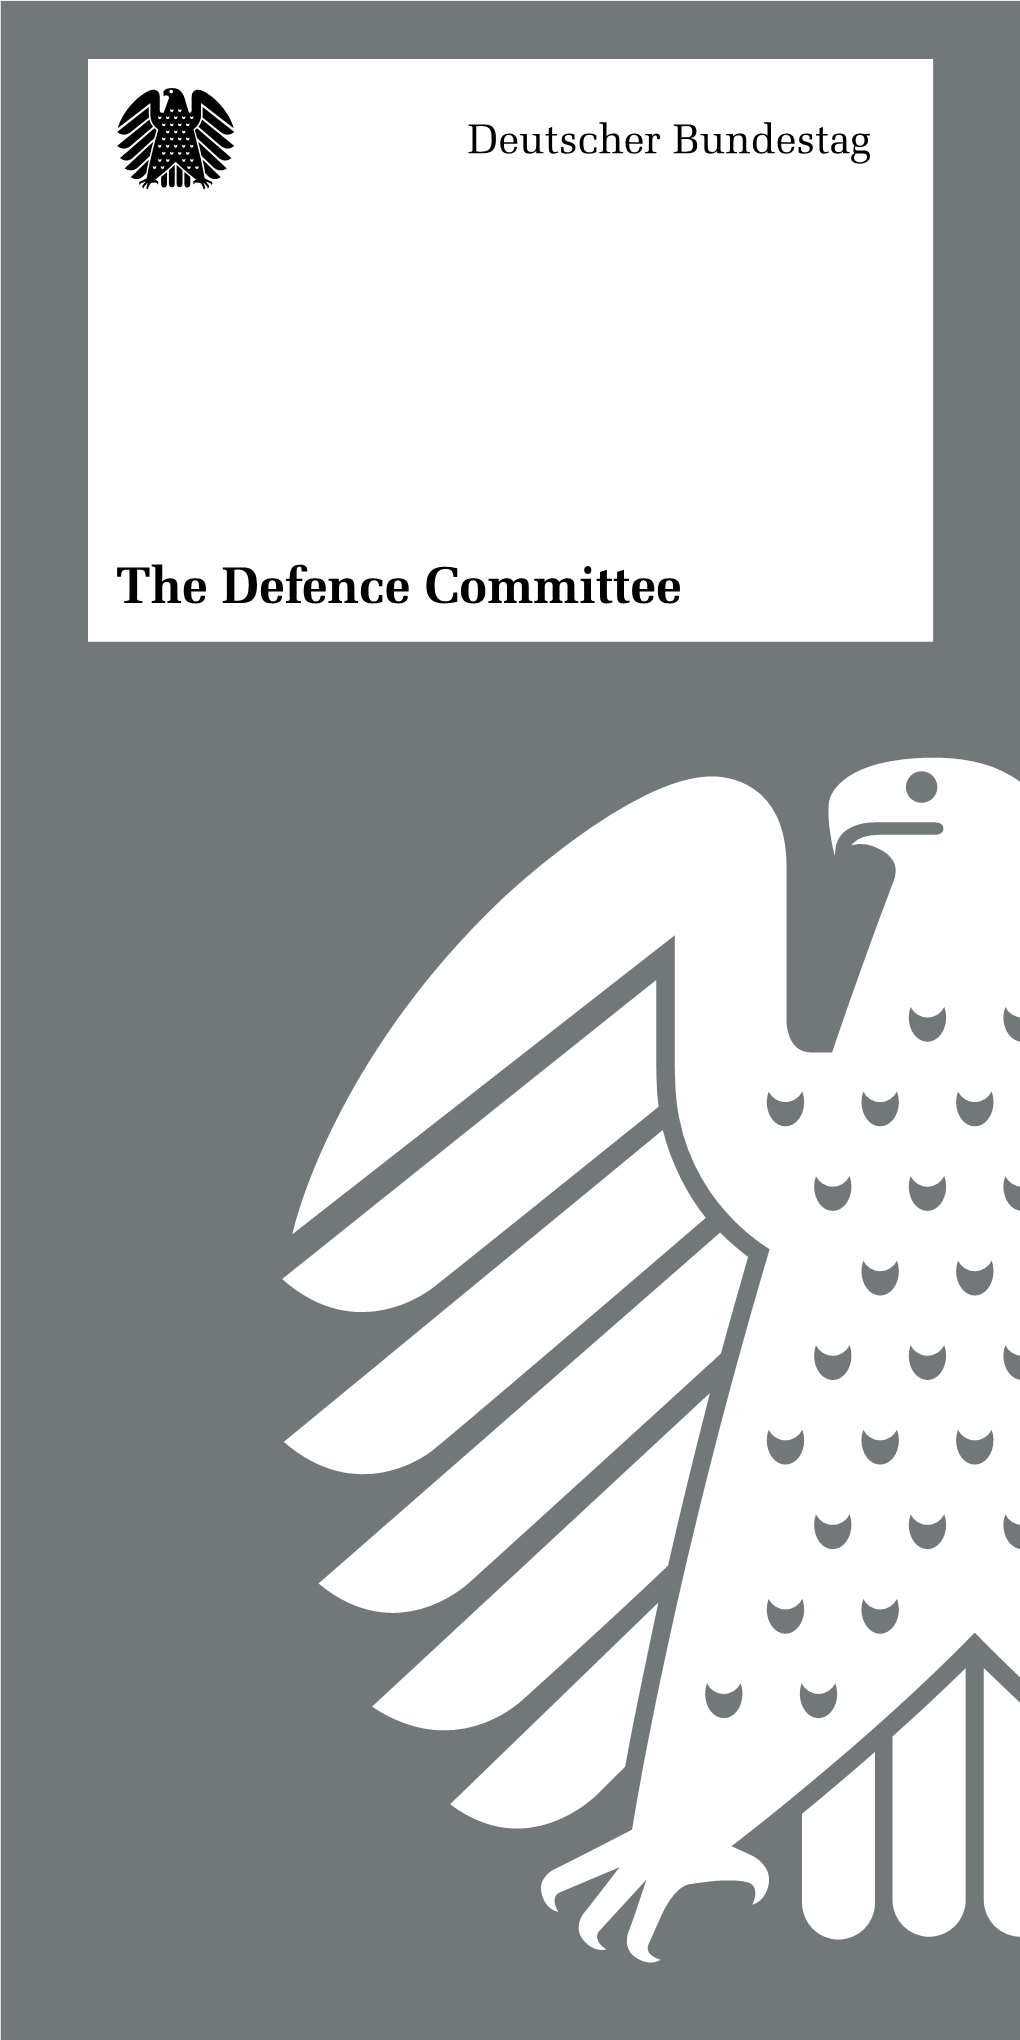 The Defence Committee